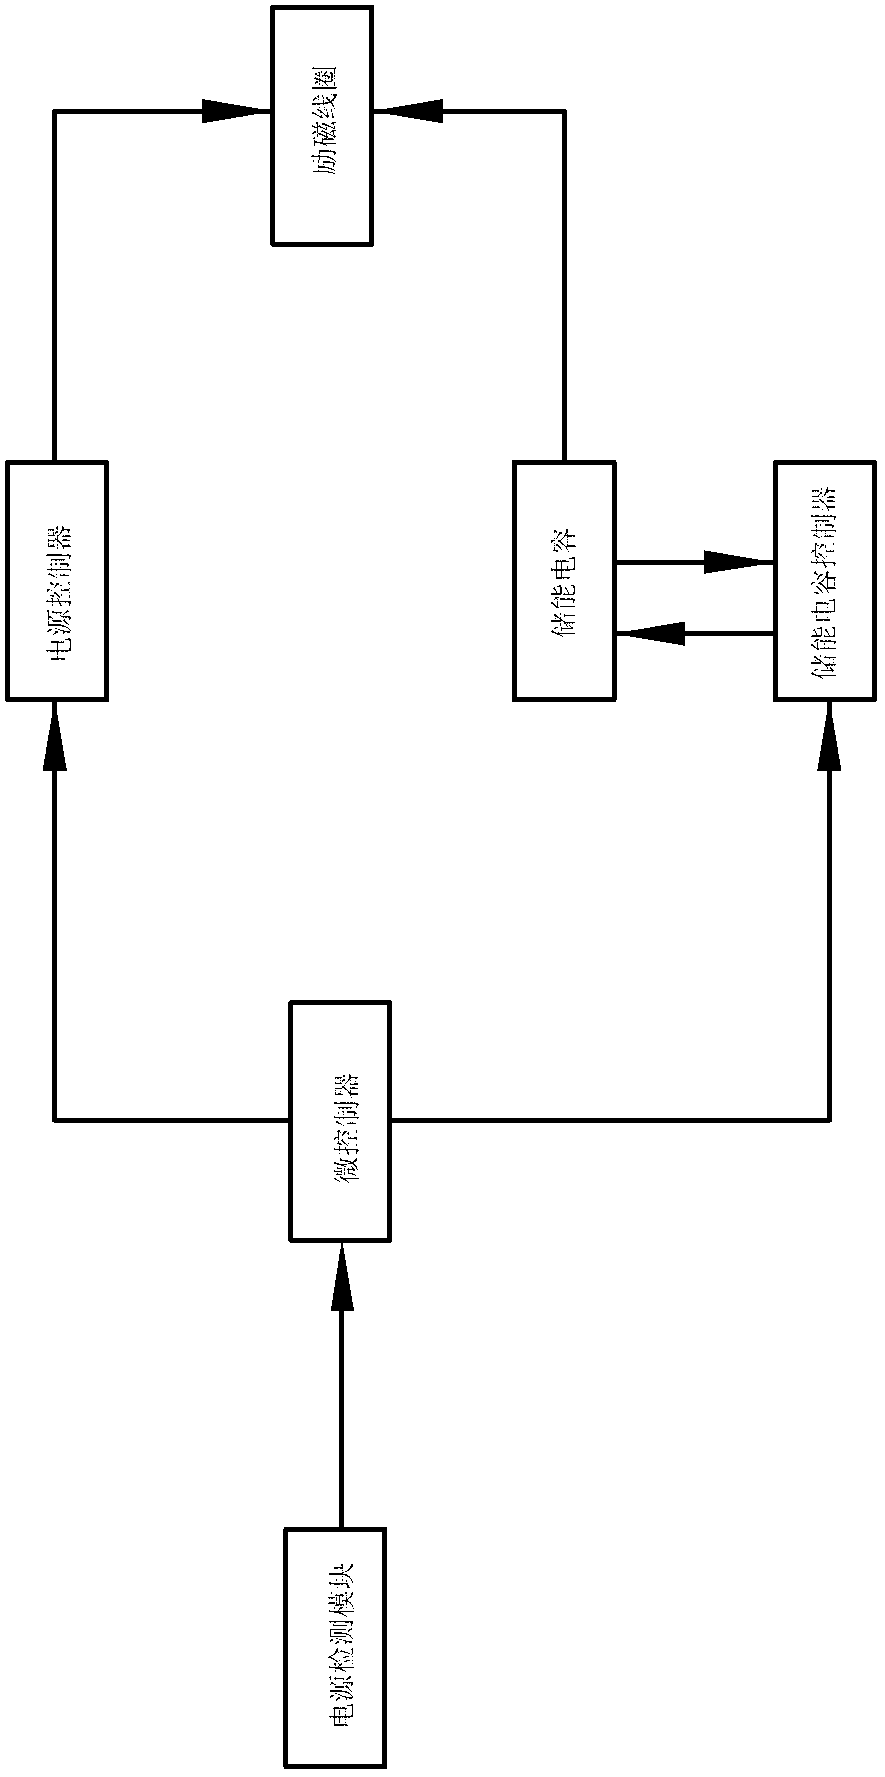 Energy-storing type energy-saving alternating-current contactor